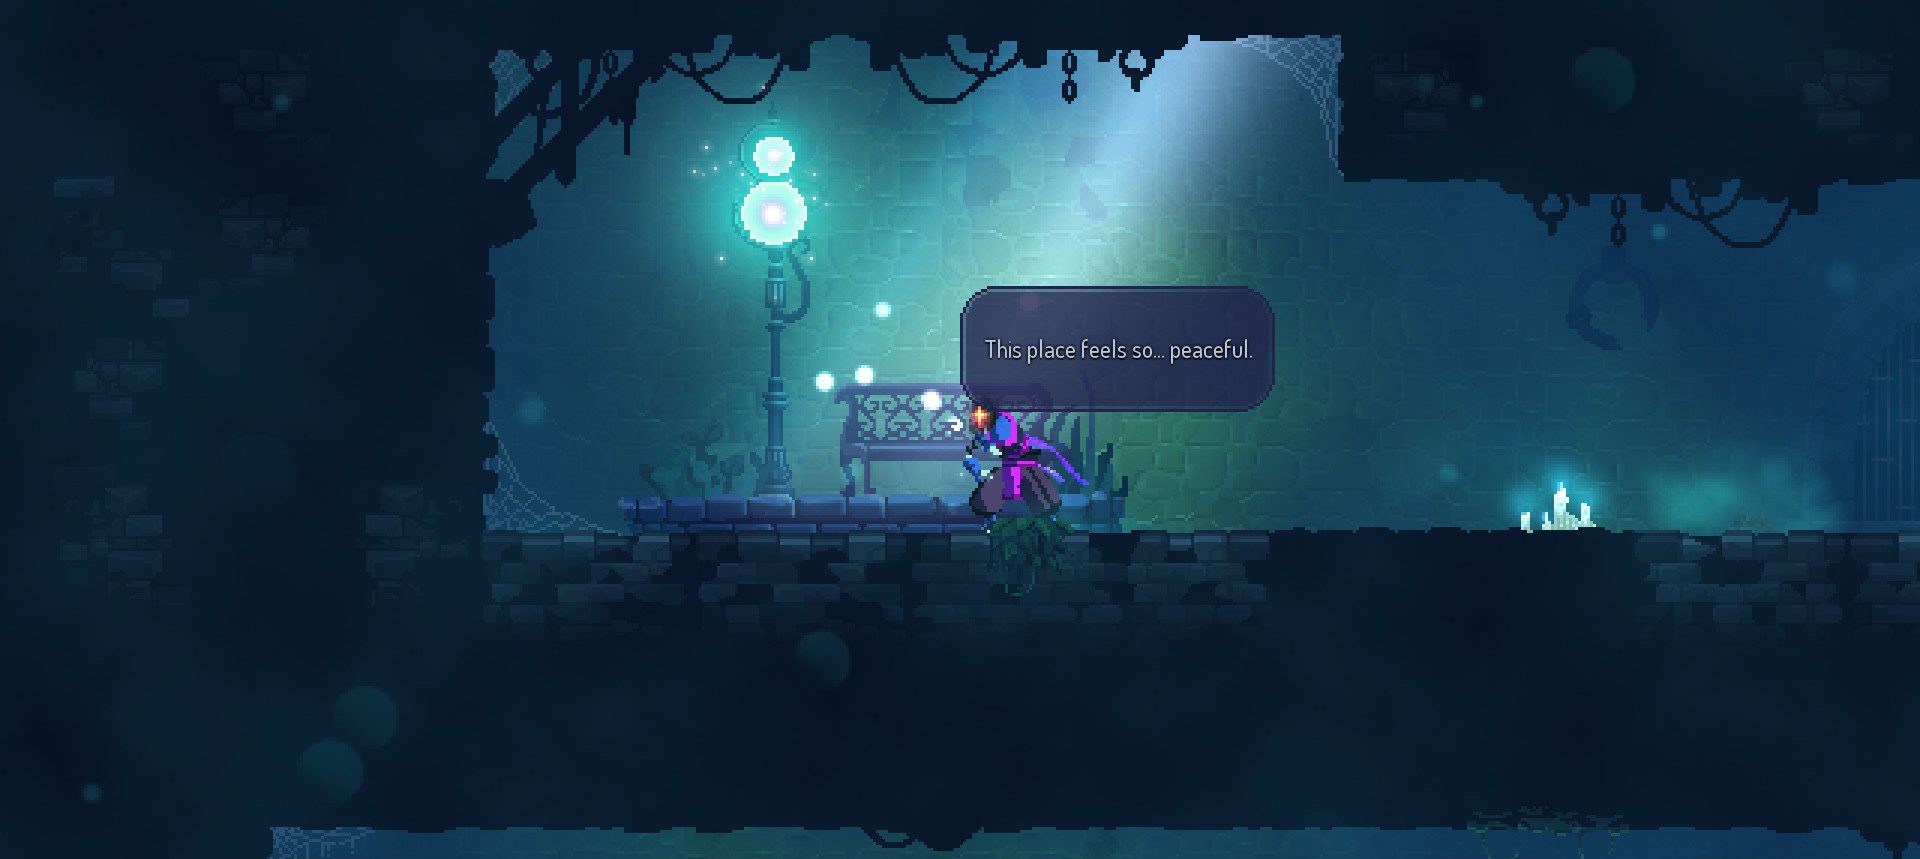 The Hollow Knight lantern and bench in Dead Cells